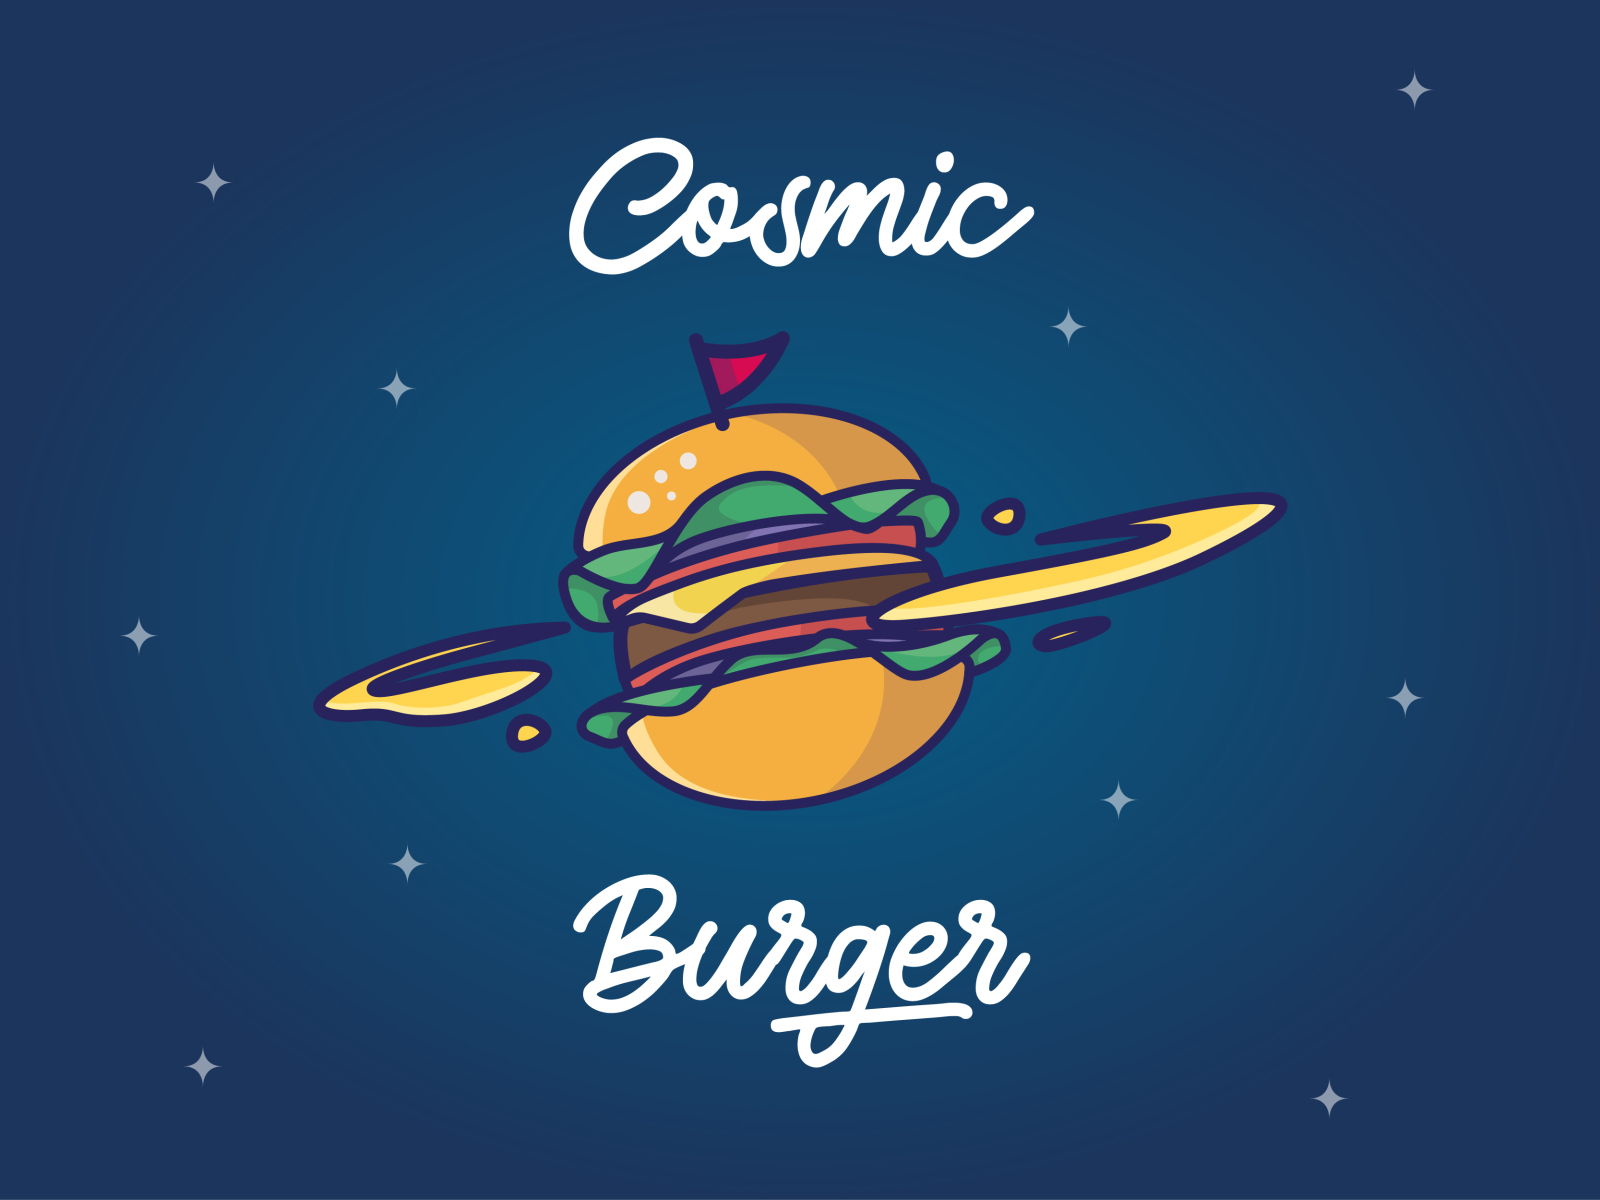 Cosmic Burger By Maxime Jacquot On Dribbble